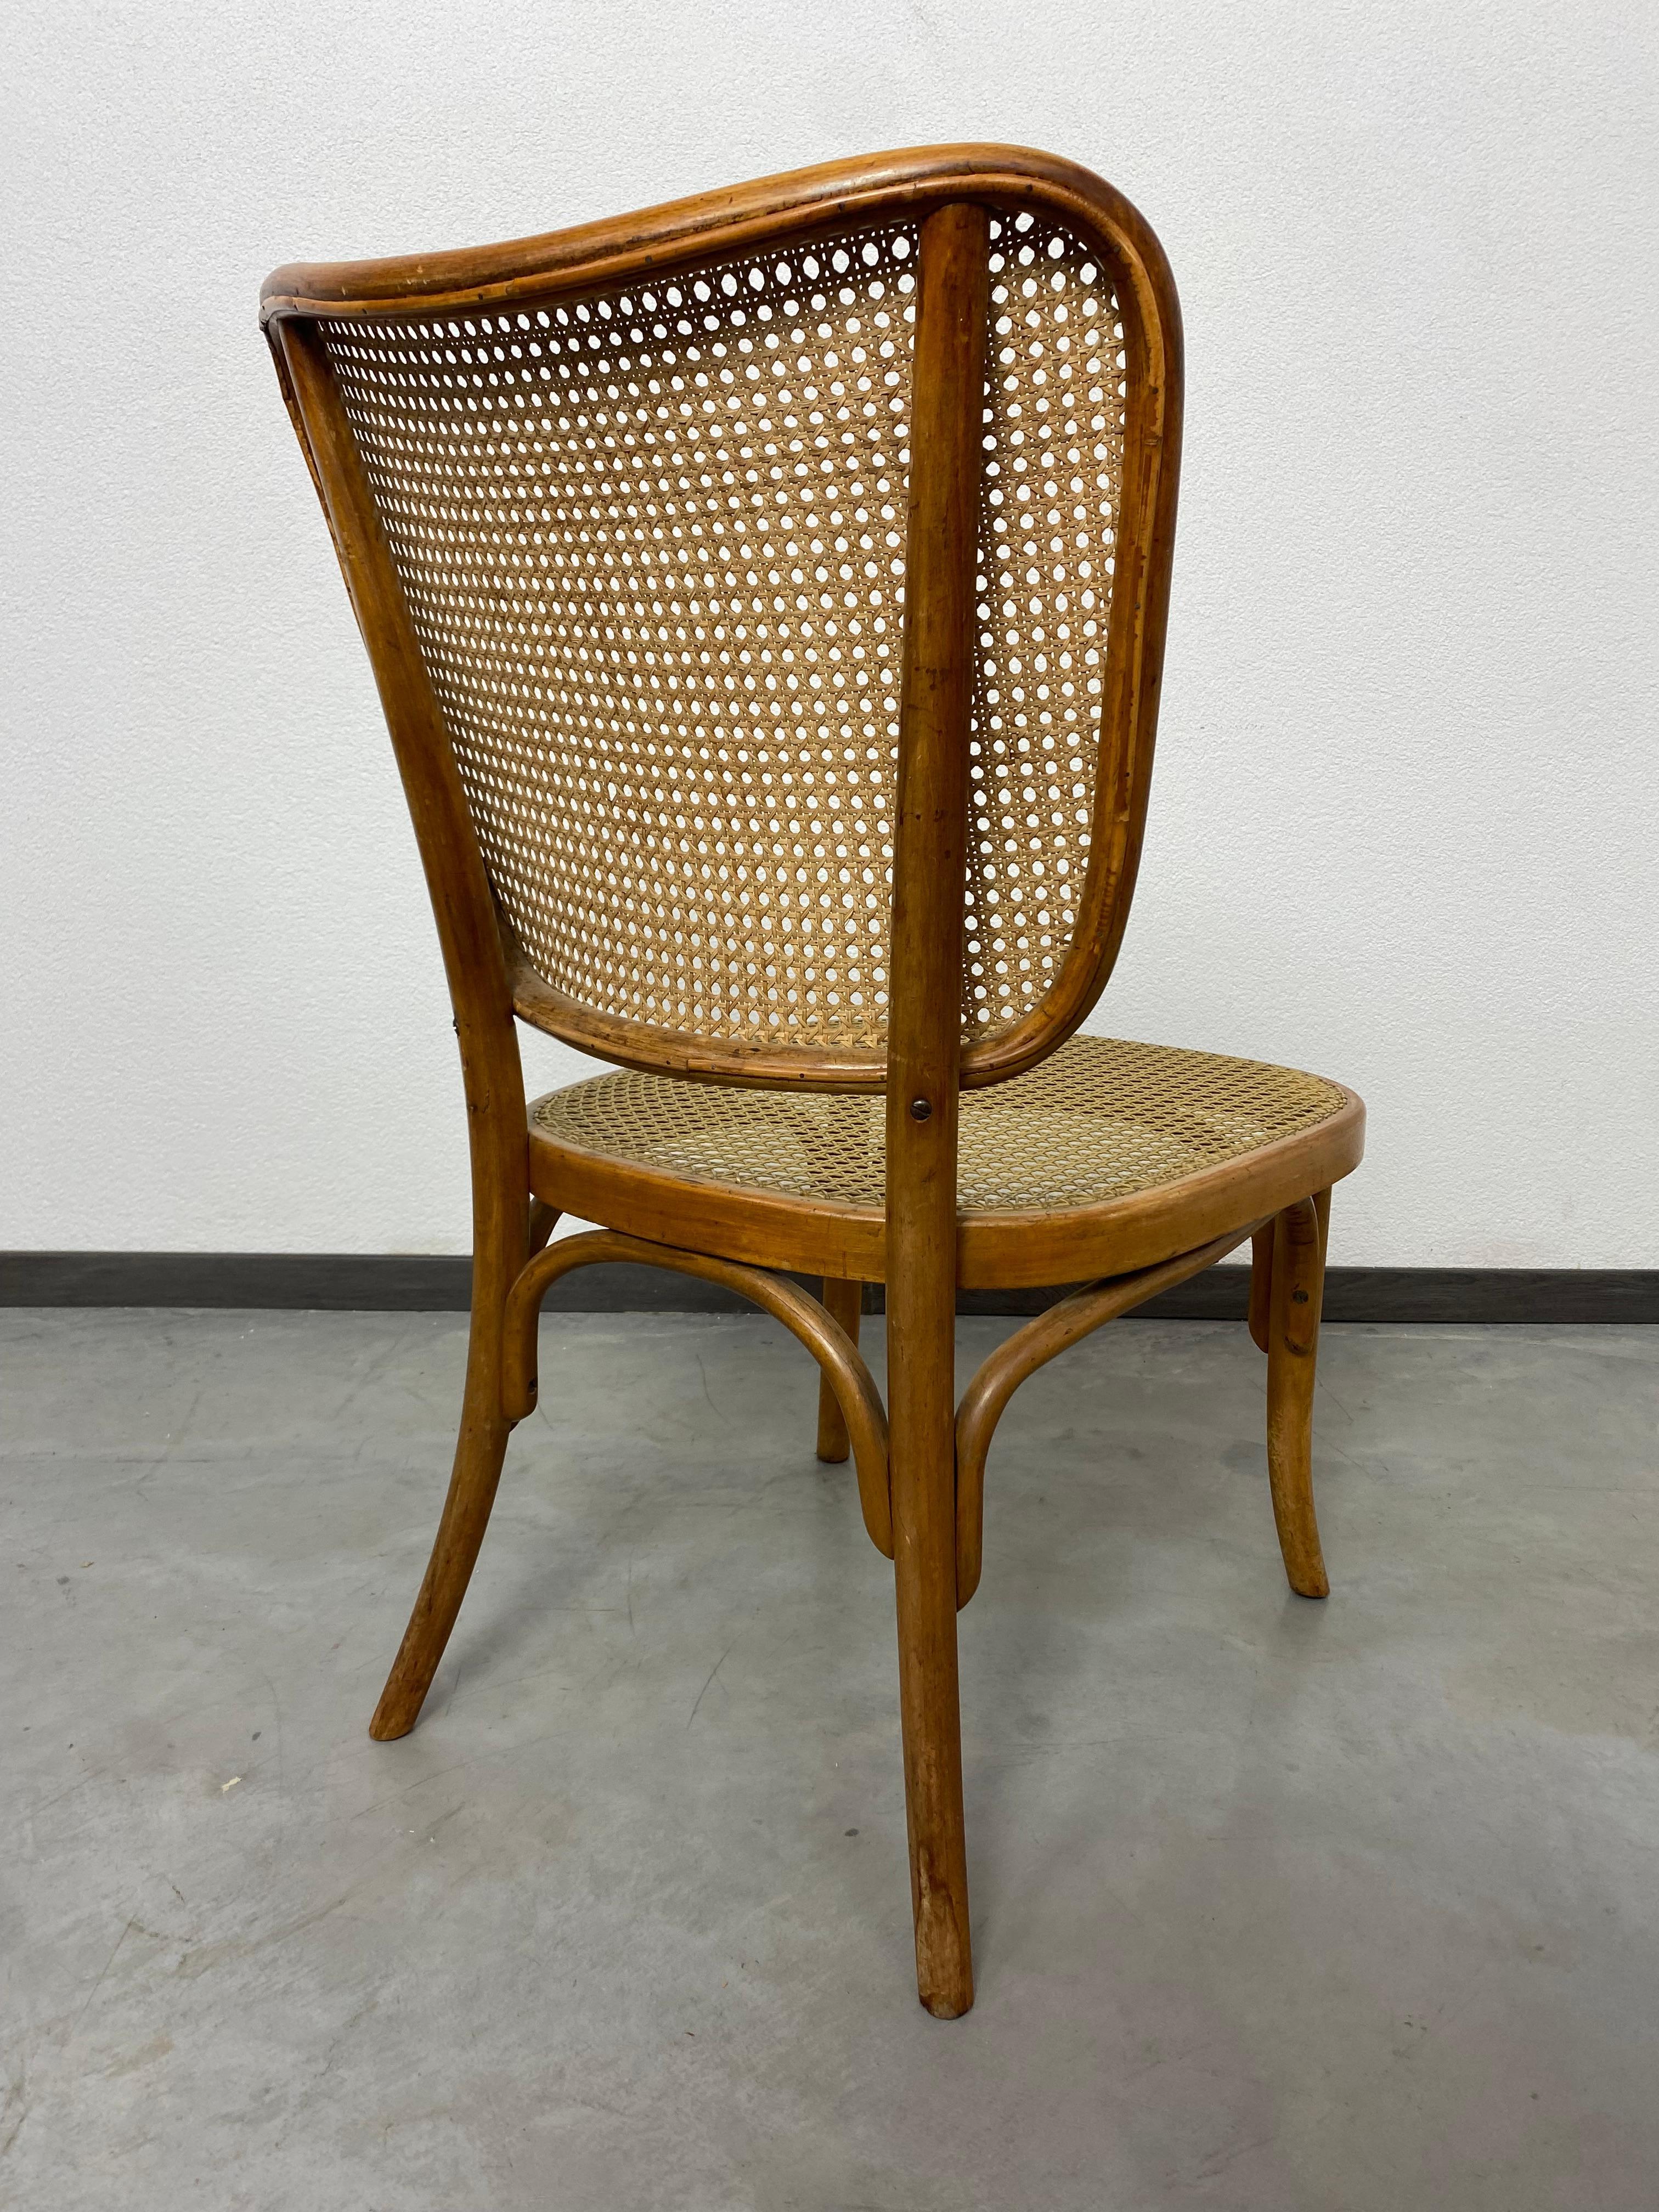 Rattan Set of 4 chairs model A821 by Adolf Gustav Schneck for Thonet Mundus For Sale